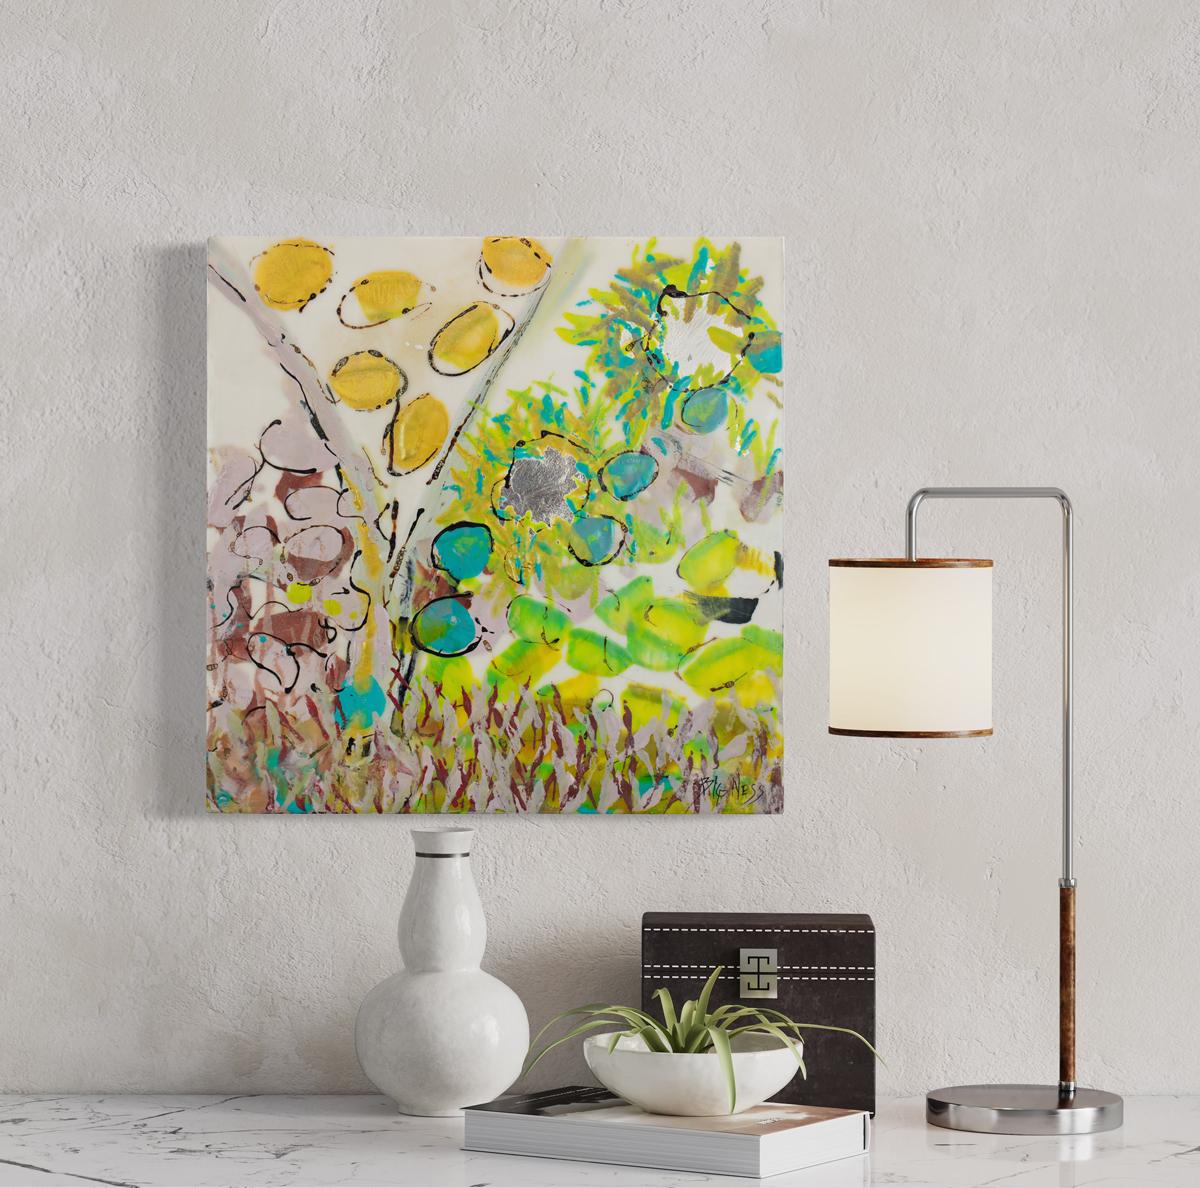 This small abstract encaustic painting by Linda Bigness features a vibrant multicolored yellow, turquoise, and muted red palette with a neutral background and neutral painted sides. Organic forms and line-work are layered throughout to create a